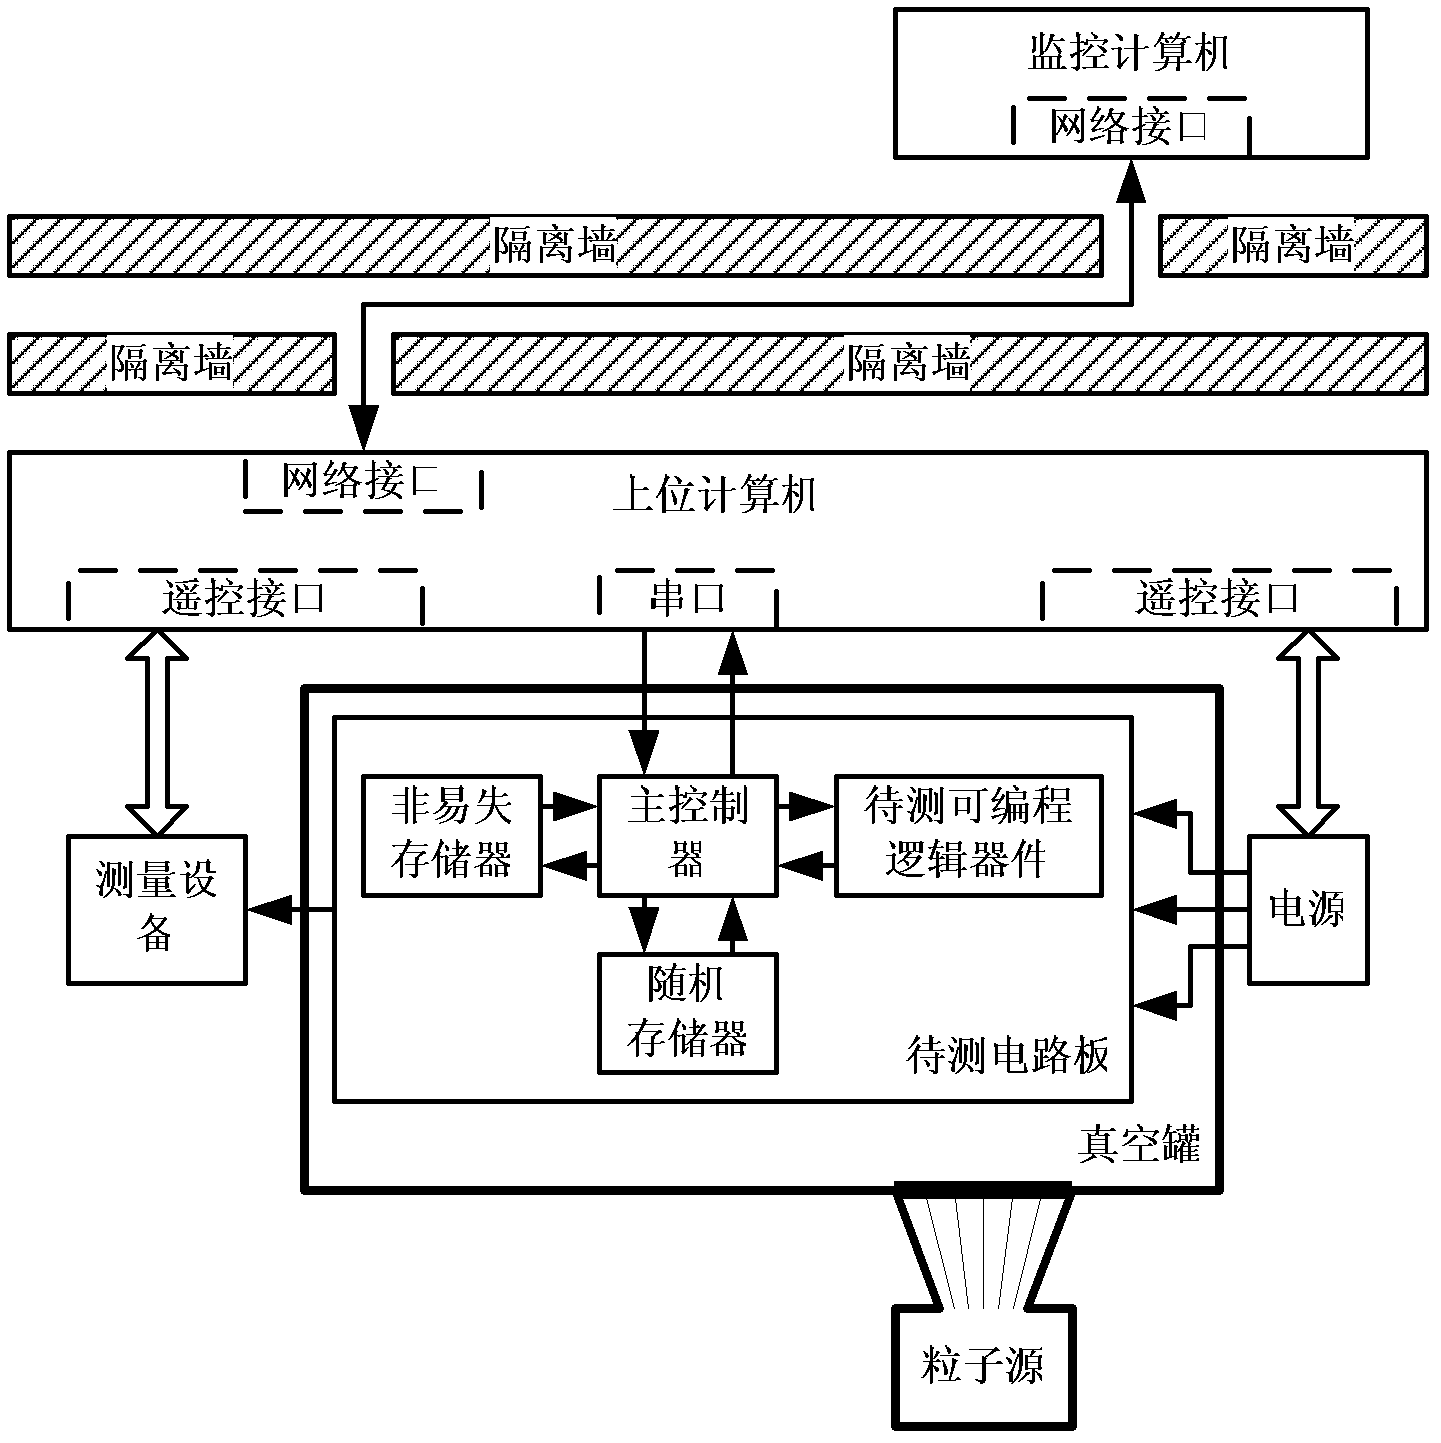 System for testing single particle irradiation performance of programmable logic device